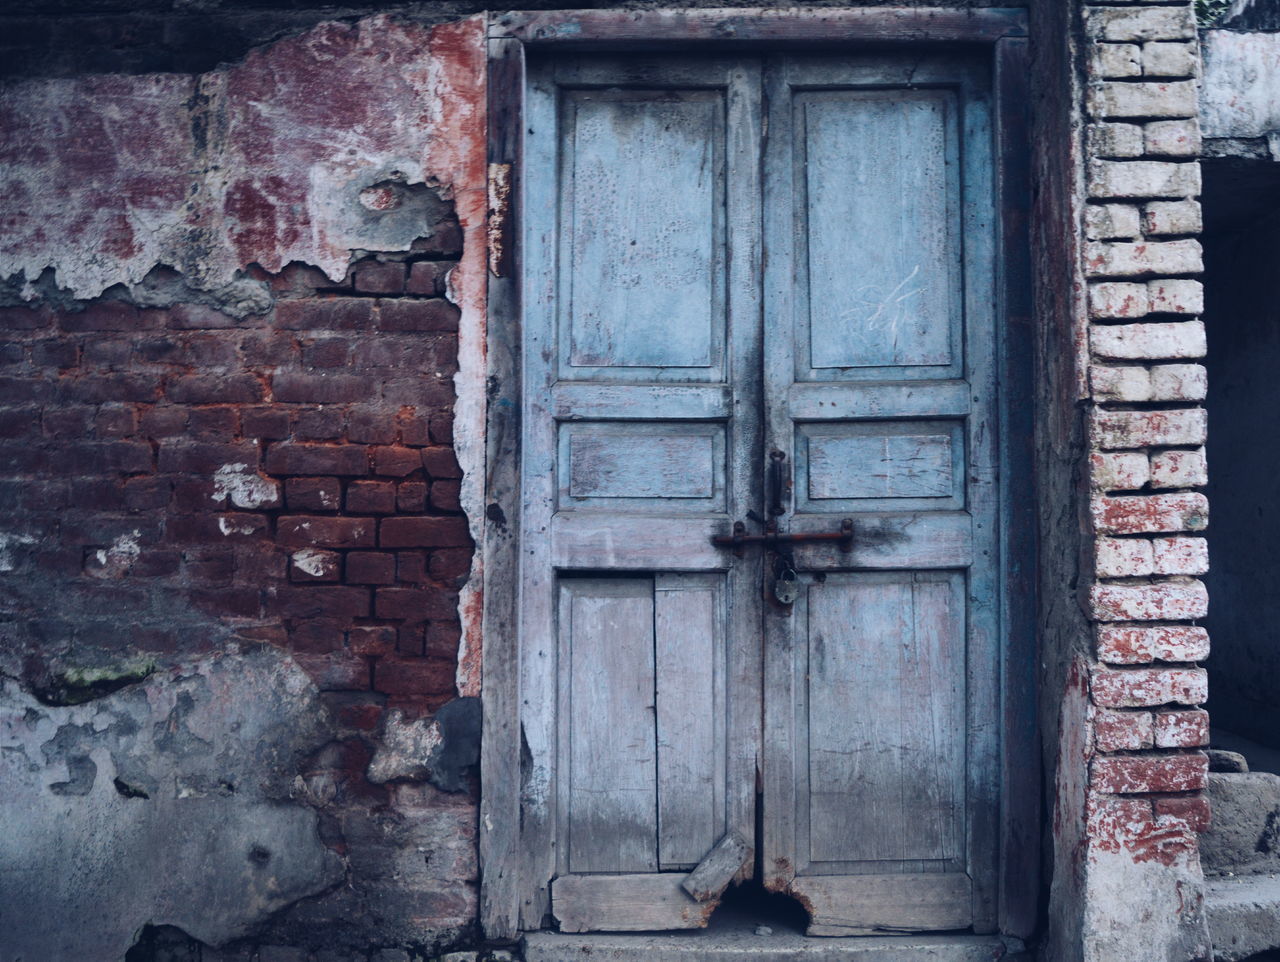 built structure, architecture, building exterior, door, old, closed, weathered, house, window, wall - building feature, wood - material, protection, safety, abandoned, damaged, security, brick wall, entrance, outdoors, deterioration